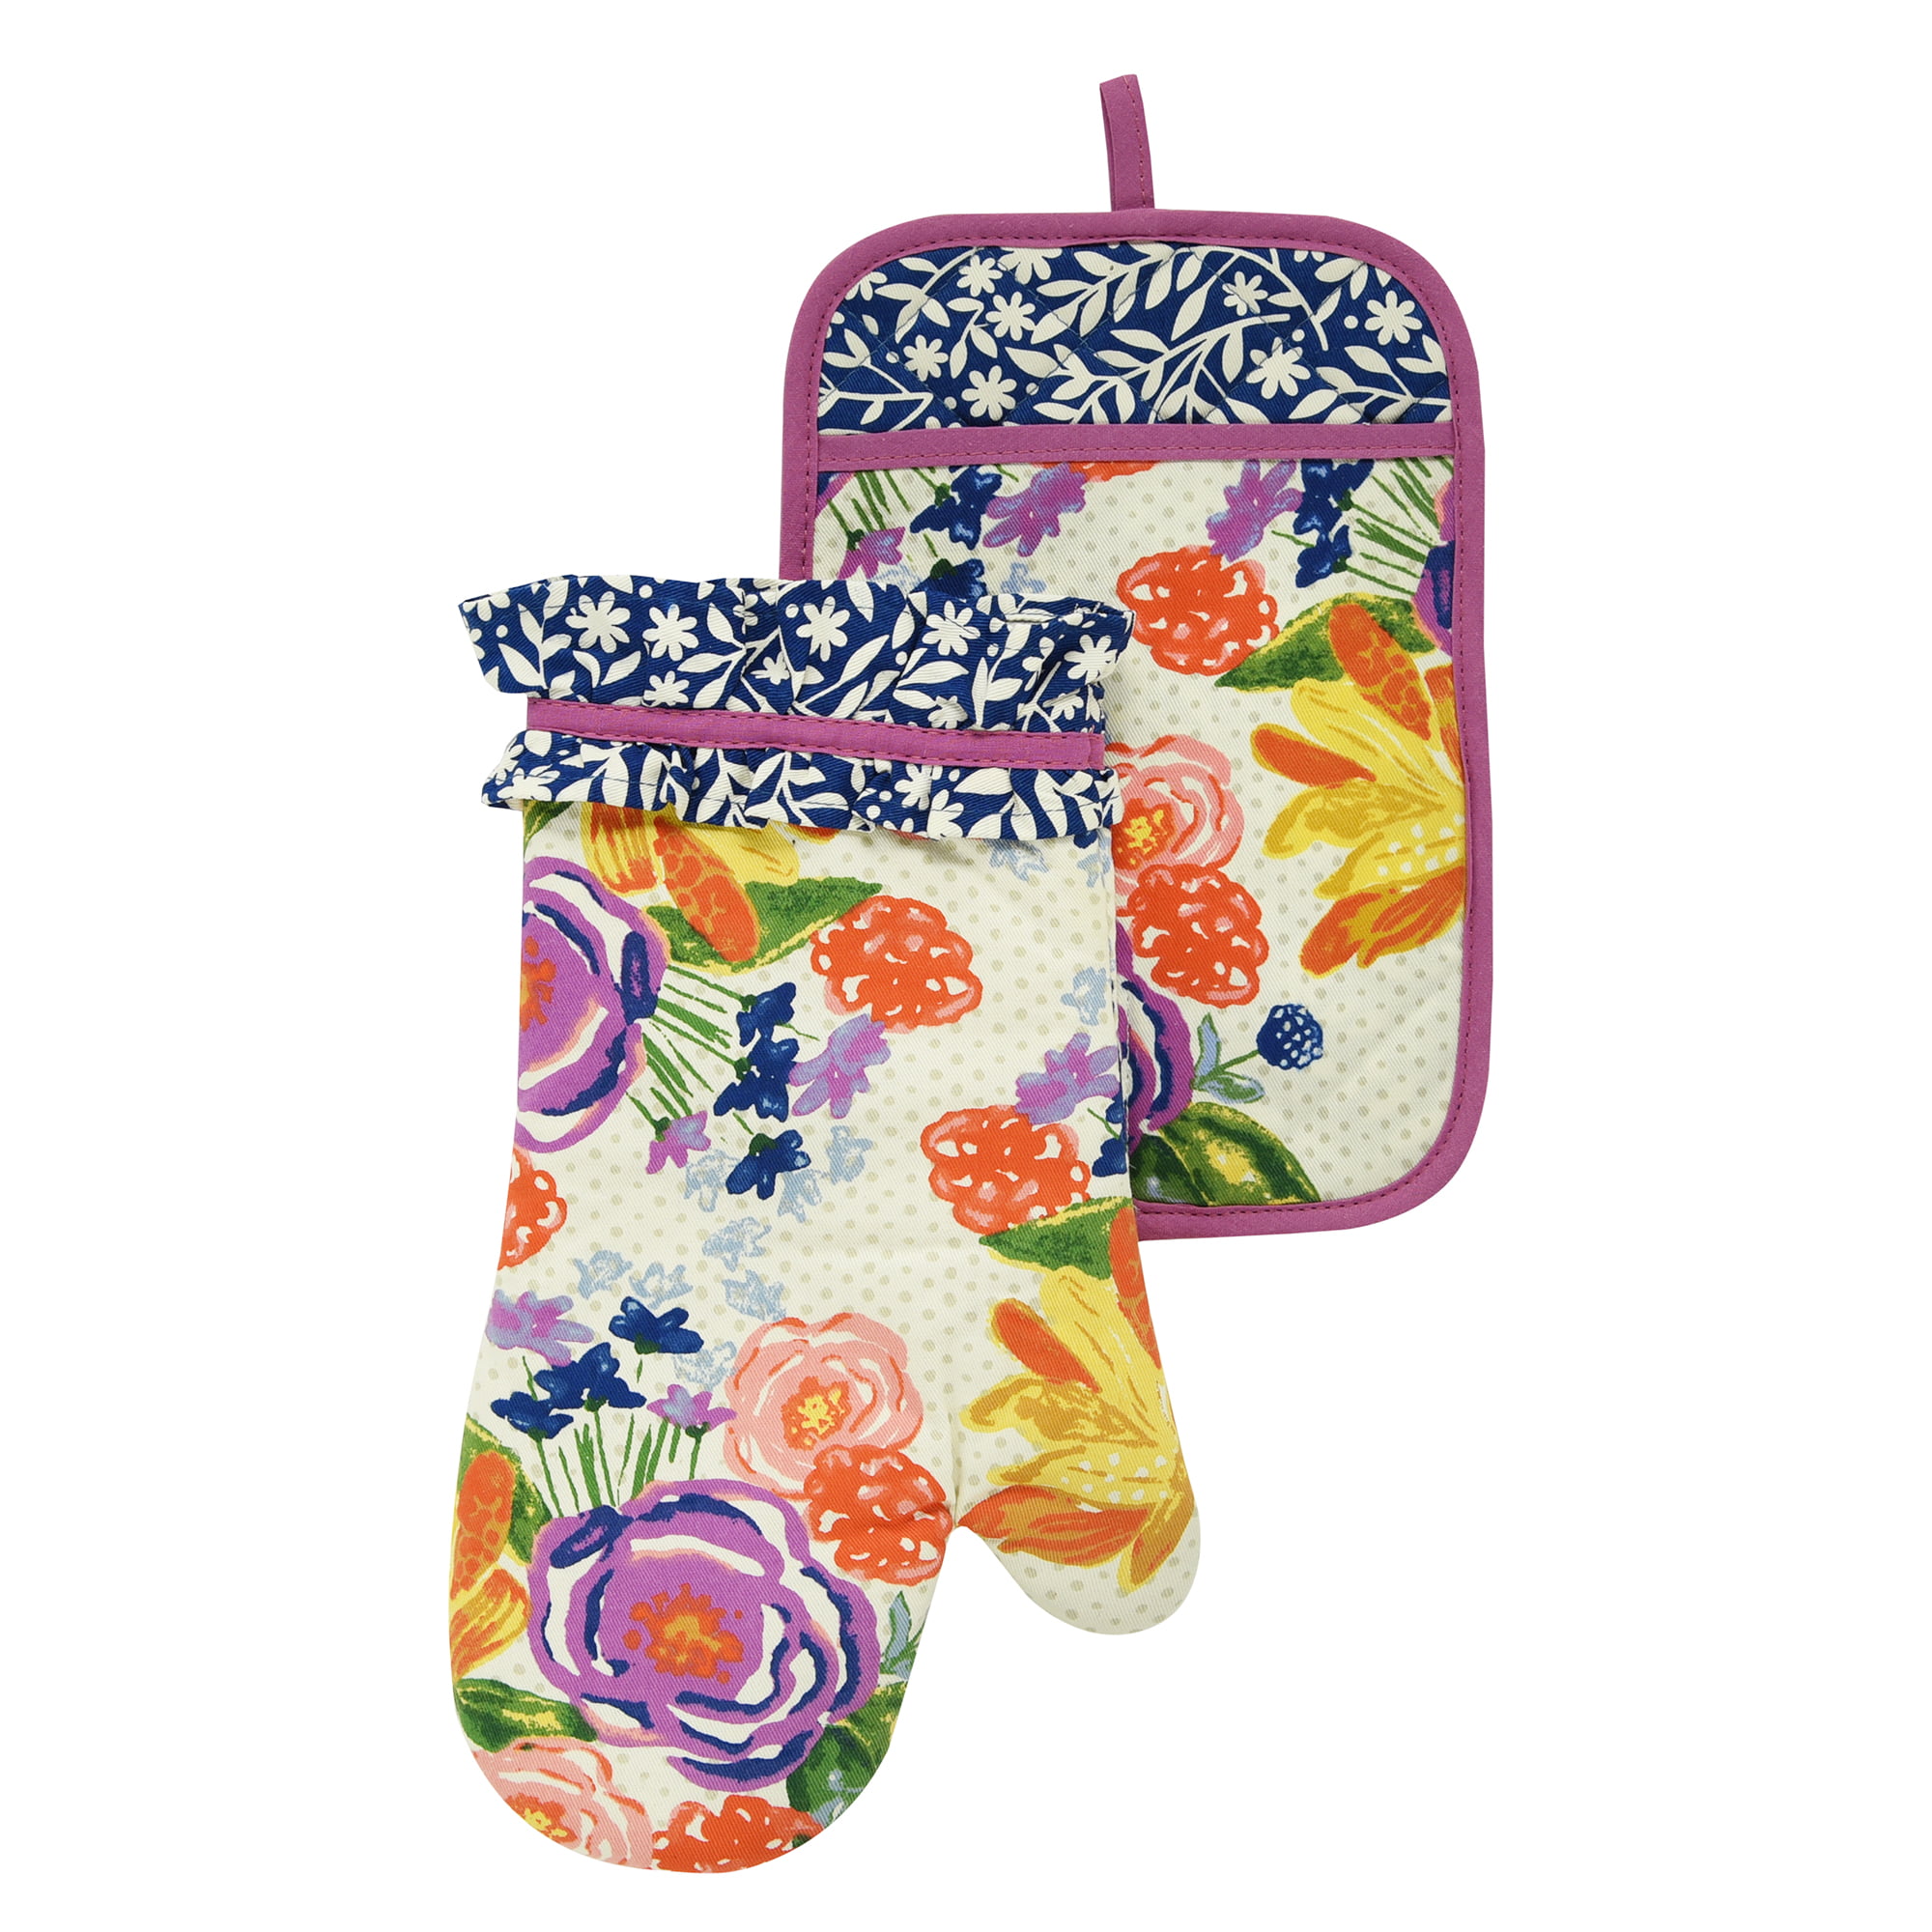  Kitchen Oven Mitts and Pot Holders Sets,The Pioneer Woman  Flower Bird Print Oven Gloves and Potholders,Heat-Resistant Oven Gloves and  Hot Pads,Pioneer Woman Kitchen Accessories,Gifts for Women : Home & Kitchen